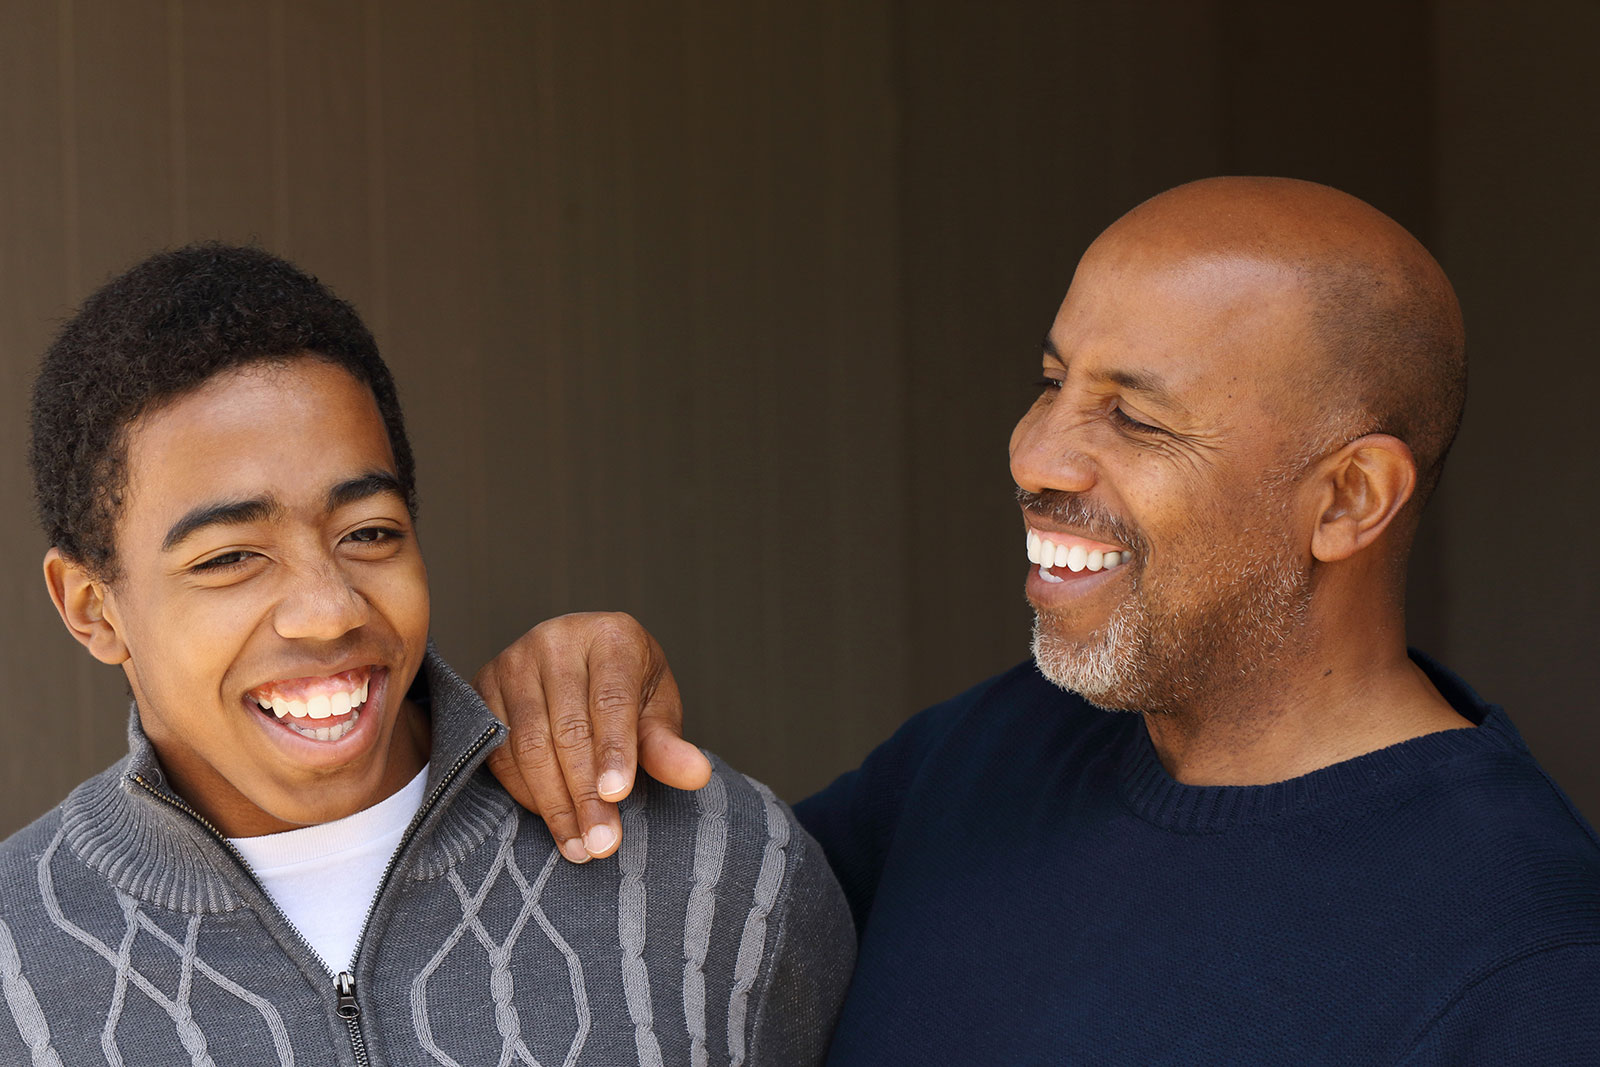 Teen sharing a laugh with his father